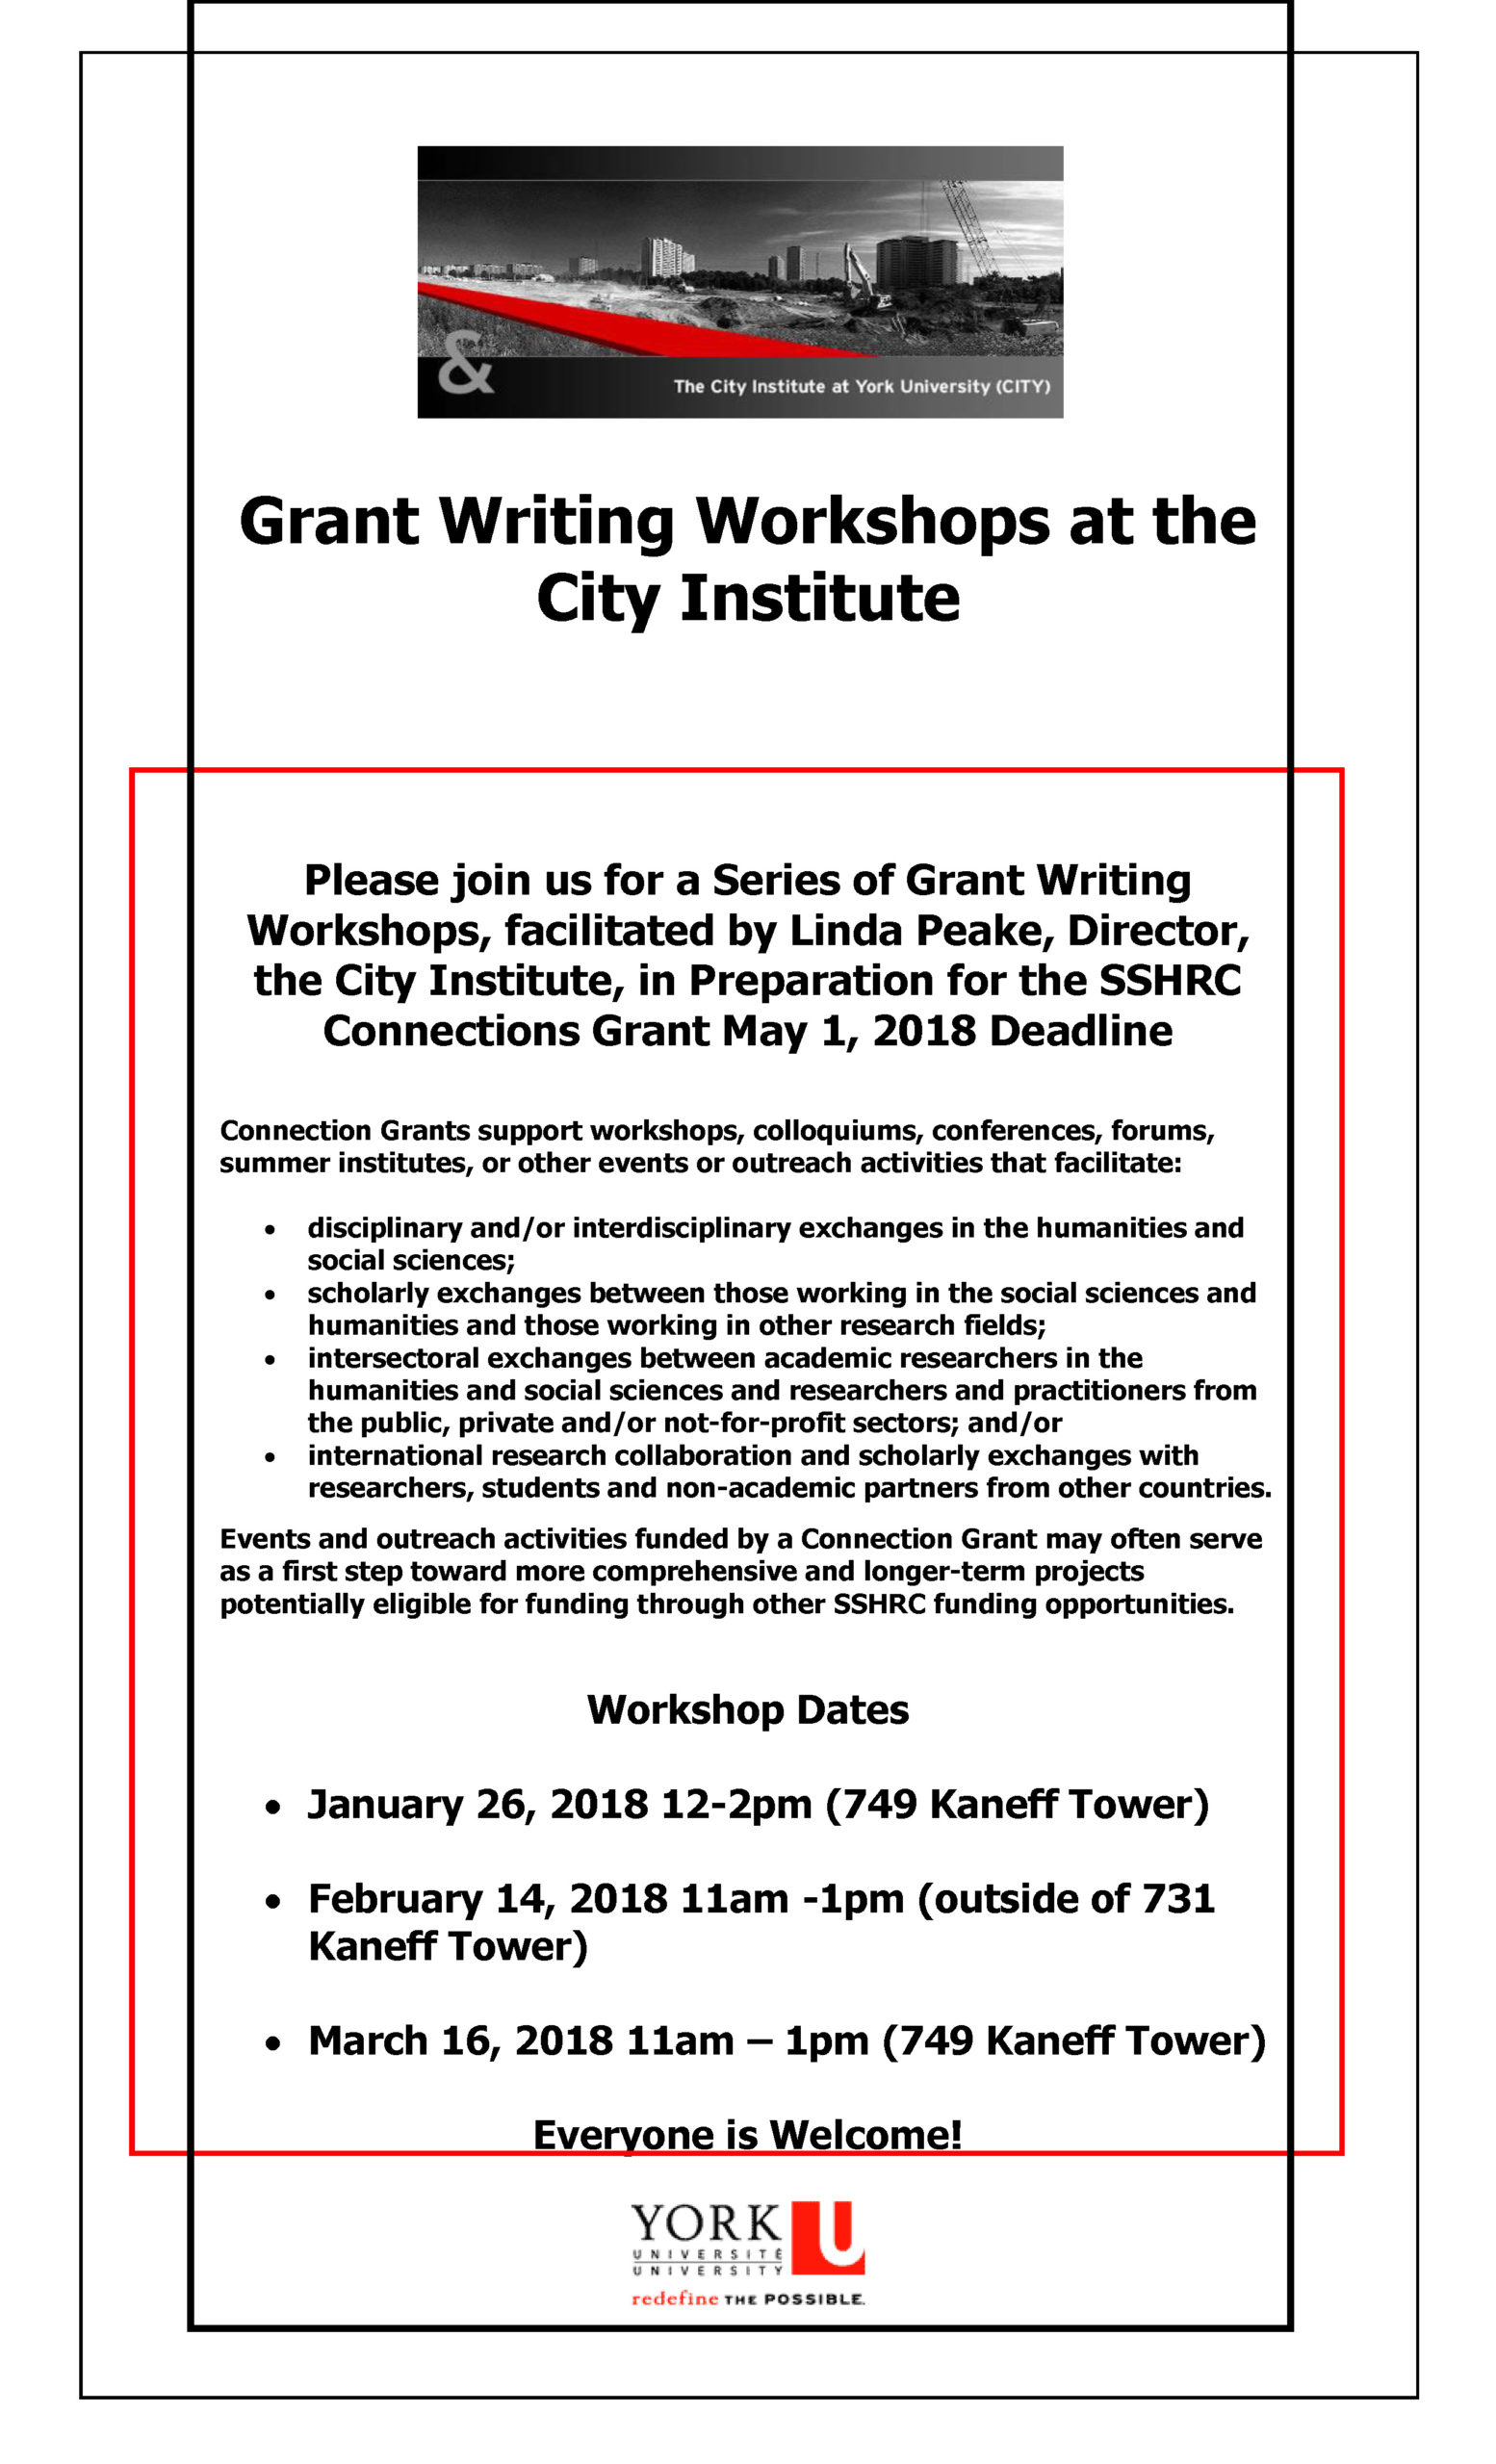 Grant Writing Workshops at the City Institute with black and red interlocking borders and event description within them.